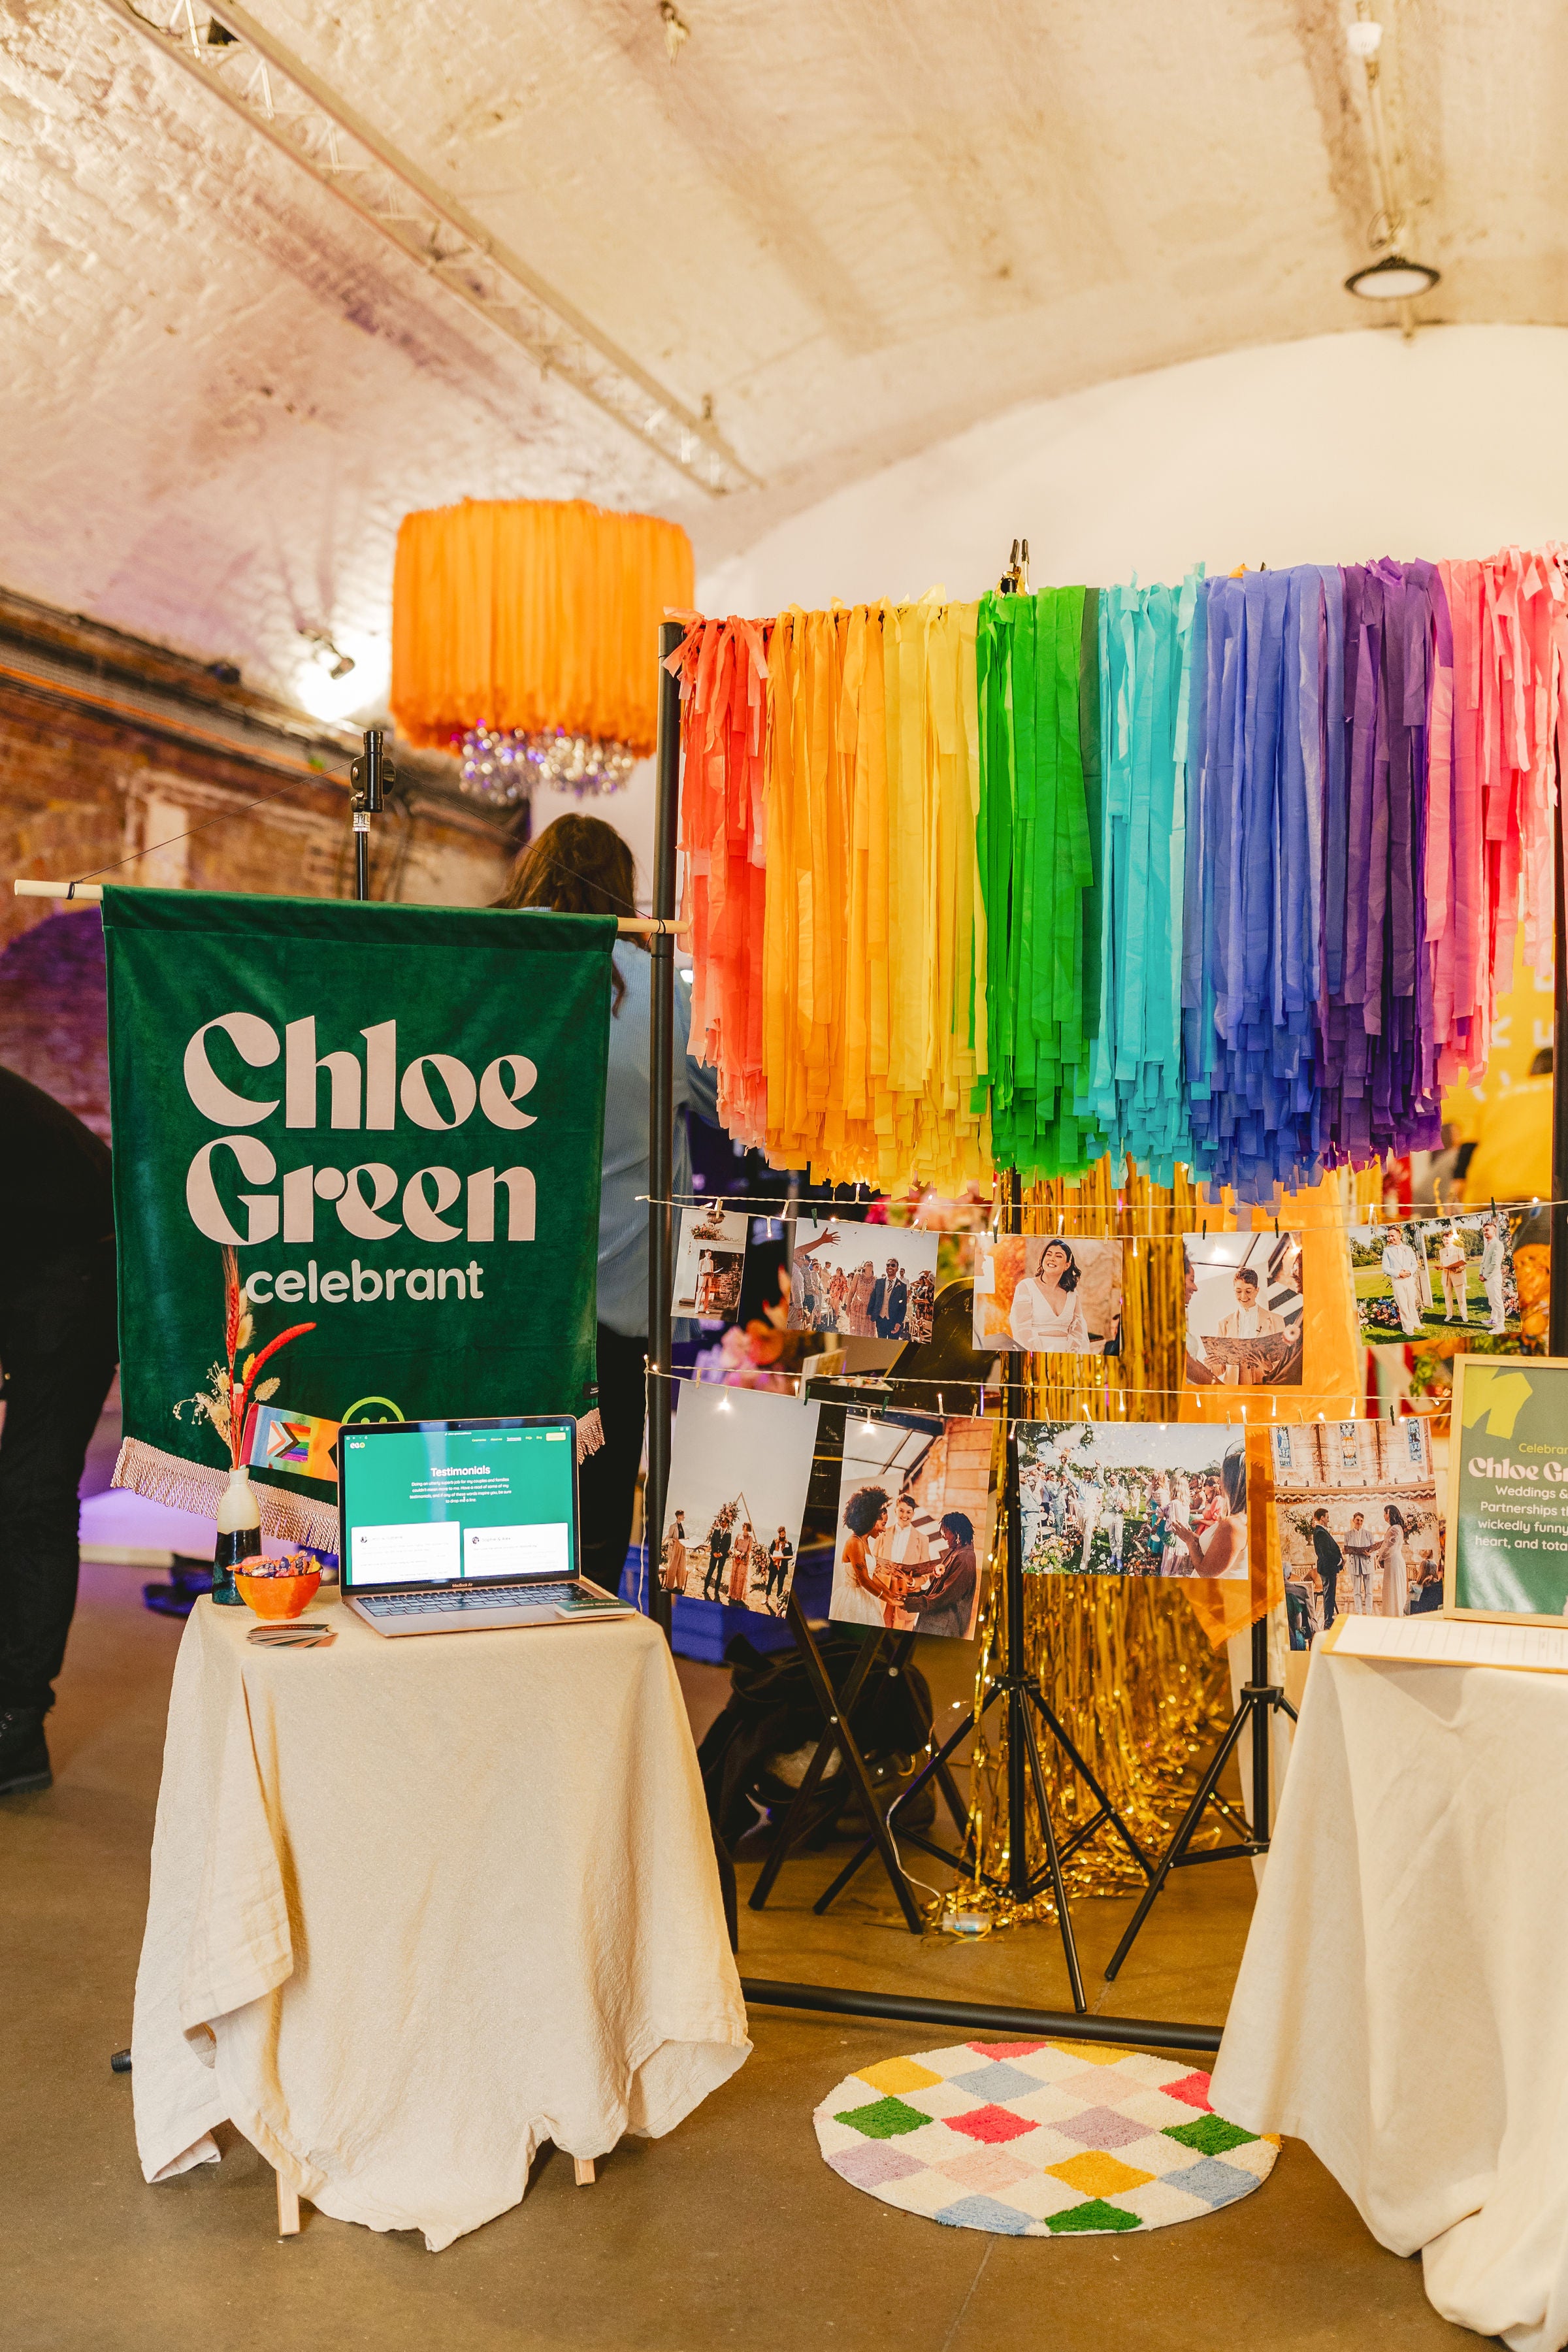 Wedding show in London featuring celebrant Chloe Green's stand with rainbow tassels and fabric banner displaying her name.